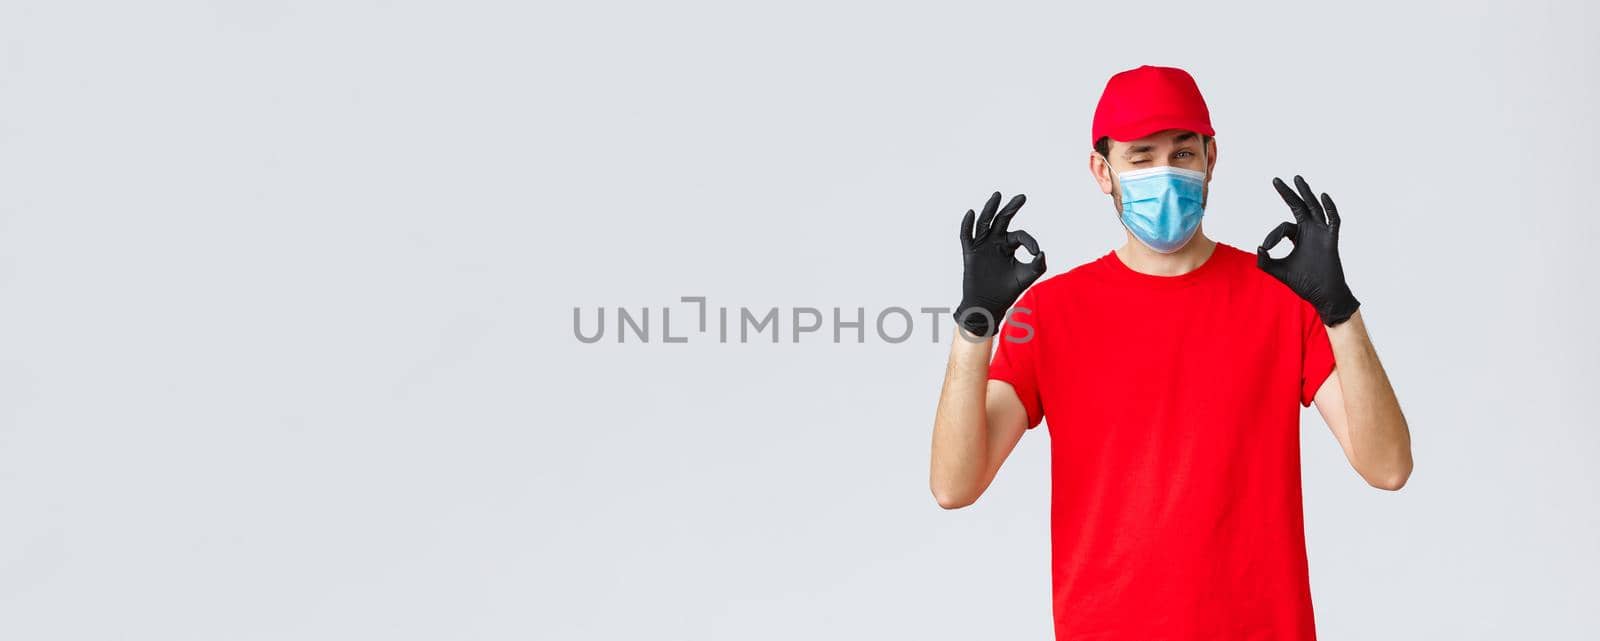 Covid-19, self-quarantine, online shopping and shipping concept. Handsome delivery guy in red cap, t-shirt, wear protective face mask and gloves from coronavirus, show okay, agree and good gesture.